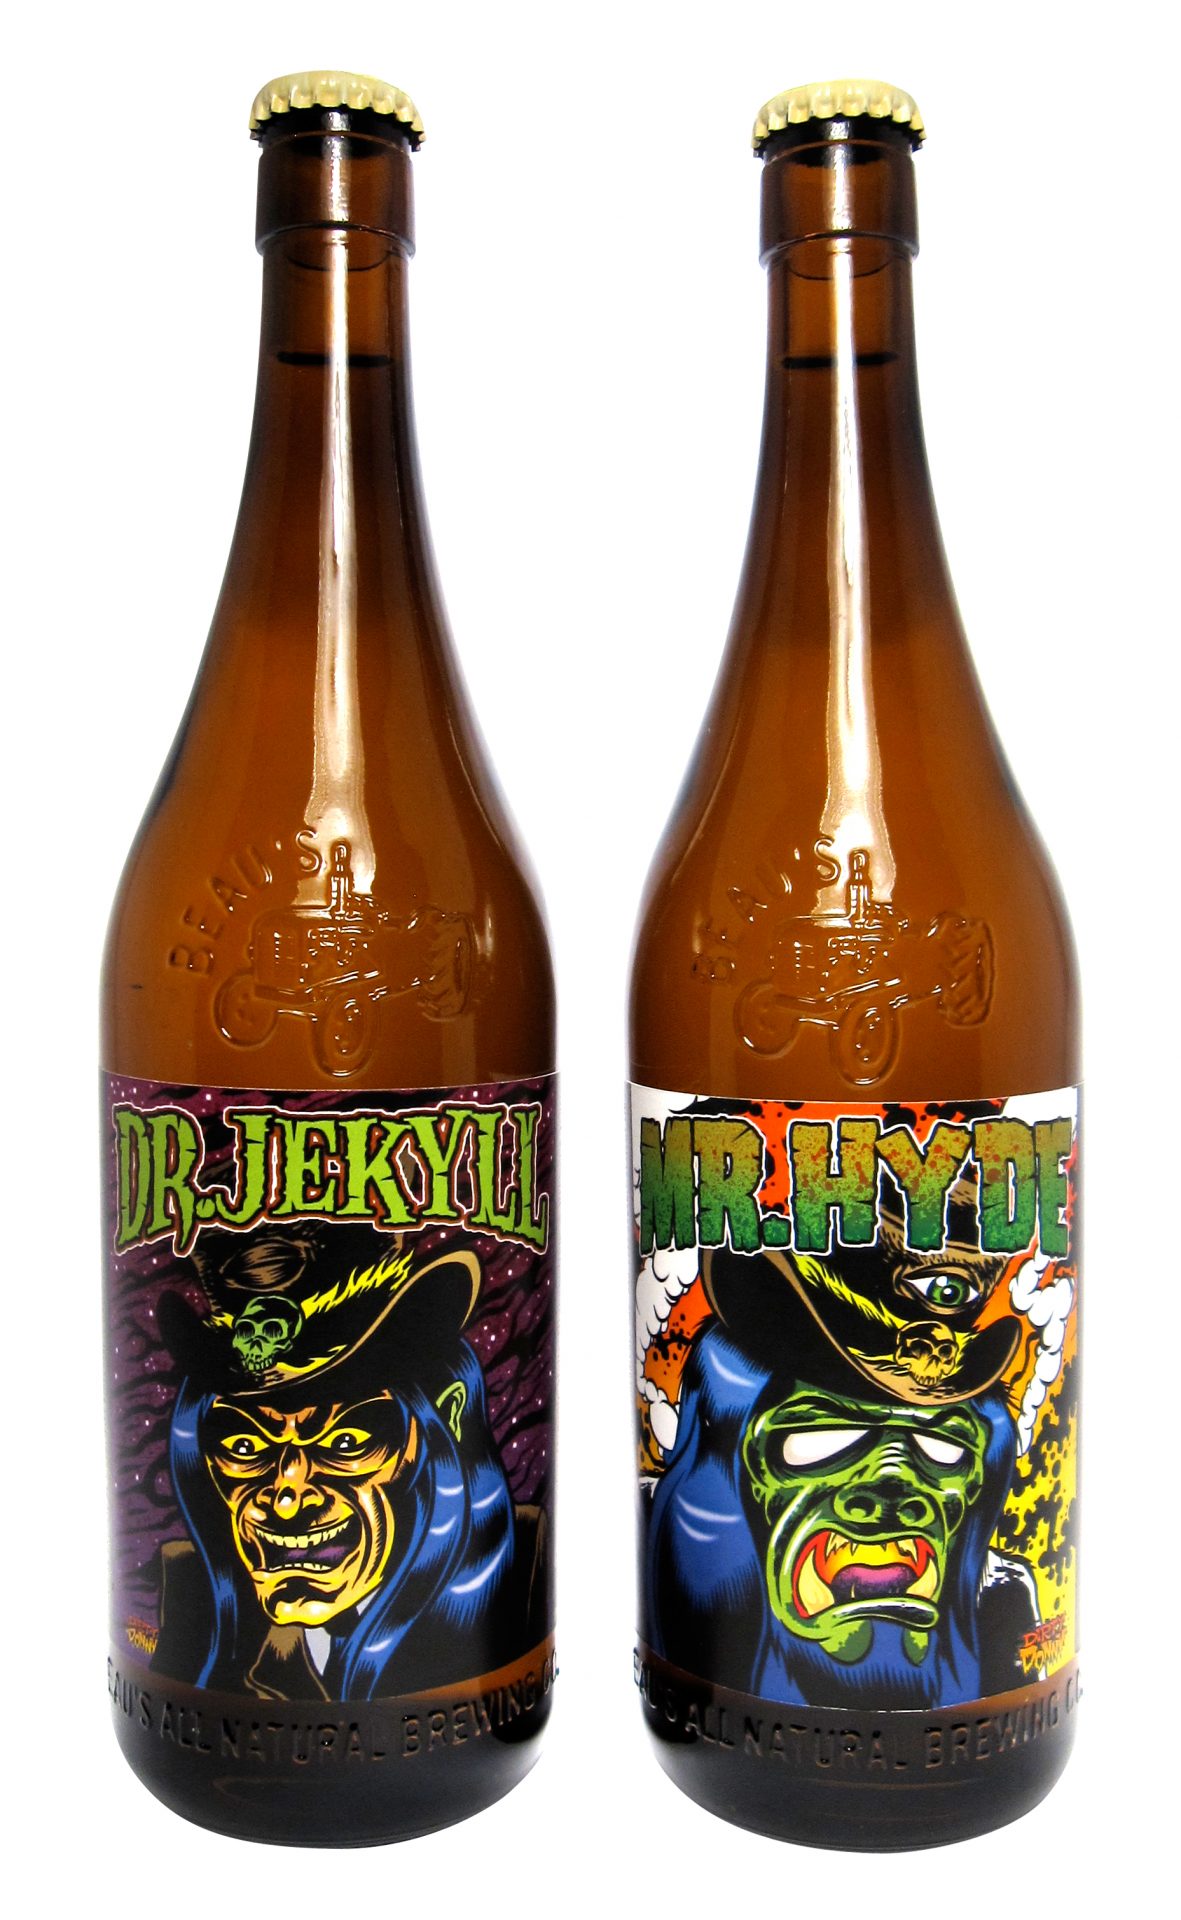 Beau’s Halloween Beers: Dr. Jekyll and Mr. Hyde